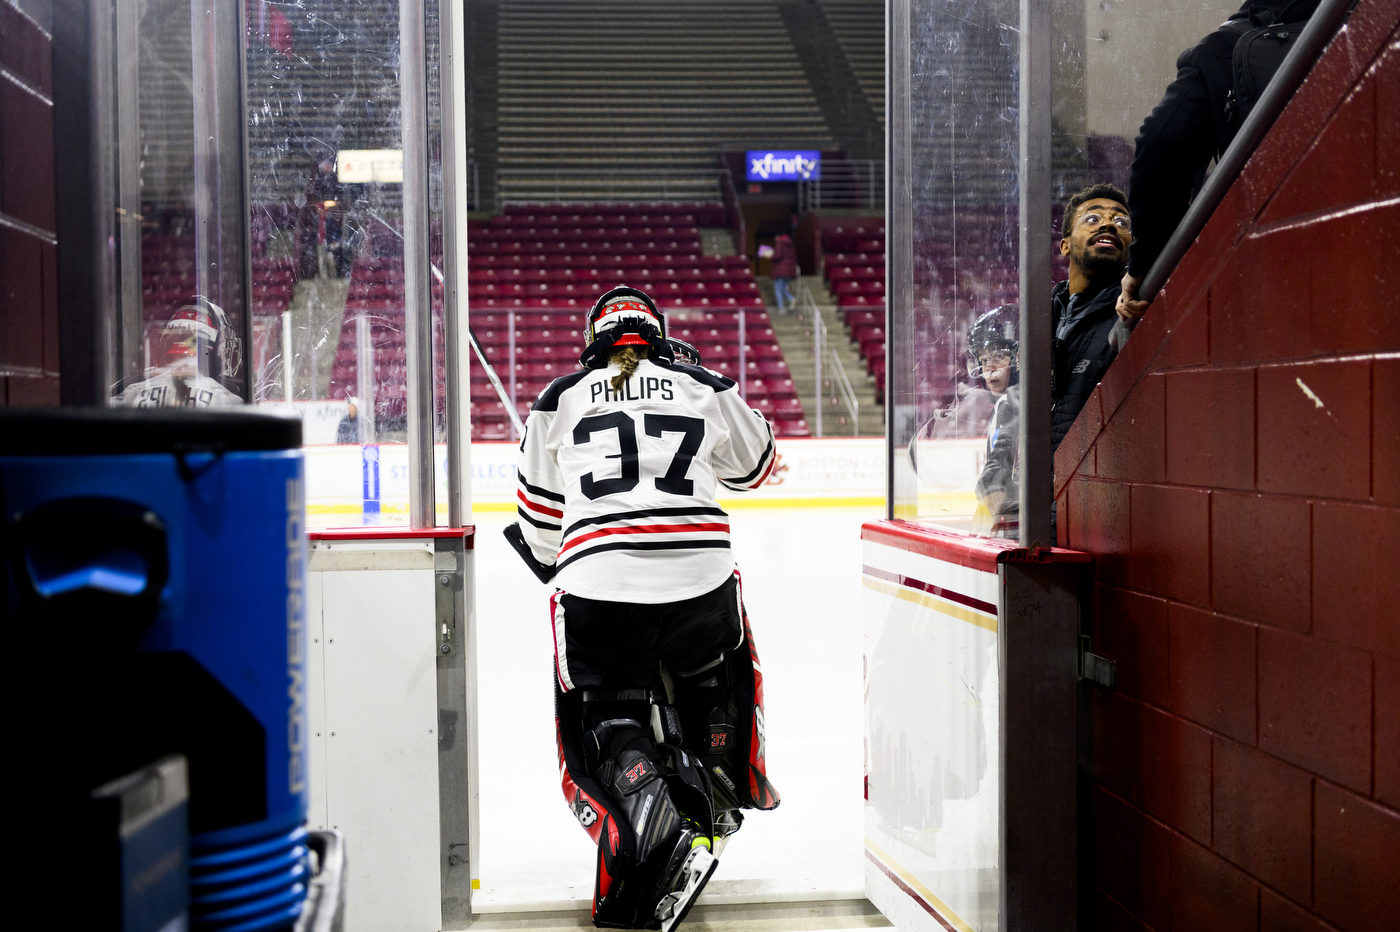 northeastern womens hockey player stepping into the rink